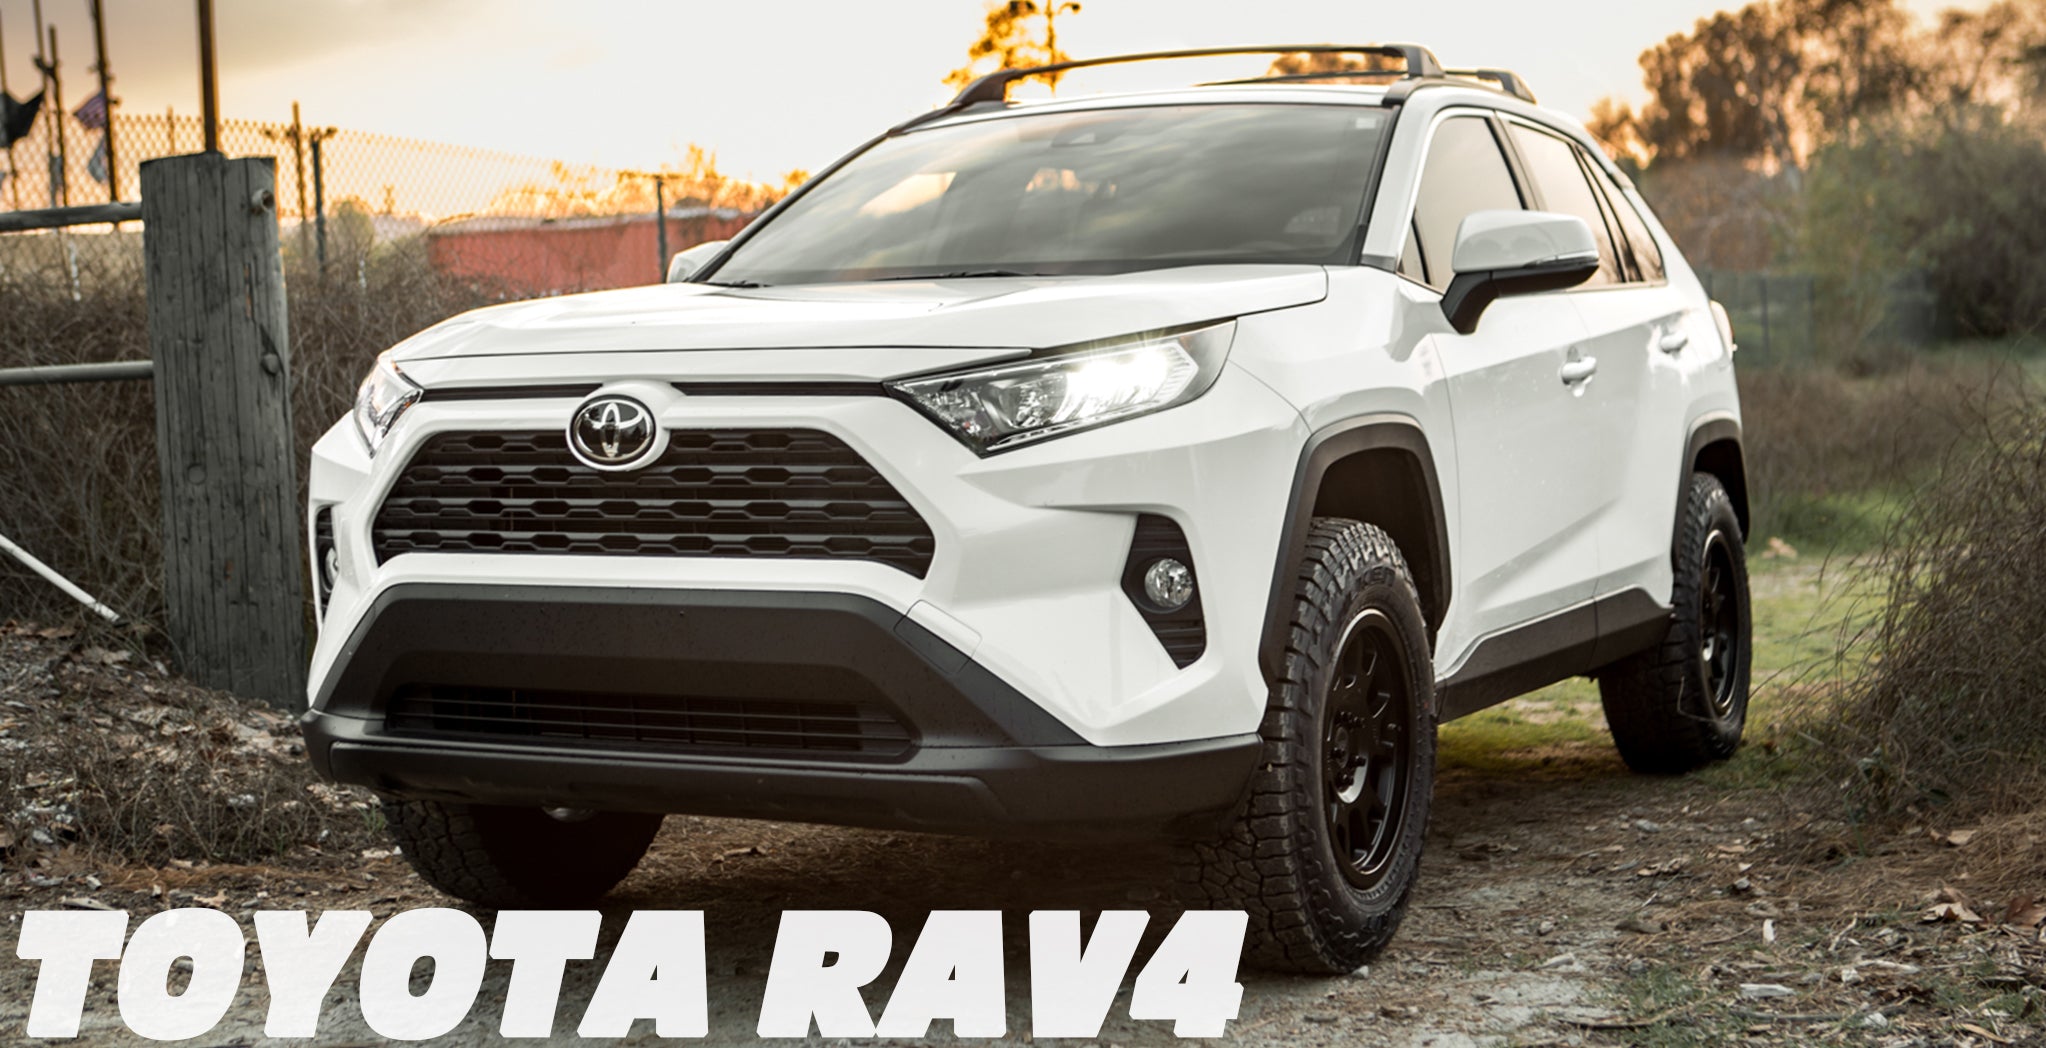 Toyota Offroad Wheels and Accessories | RRW - Relations Race Wheels